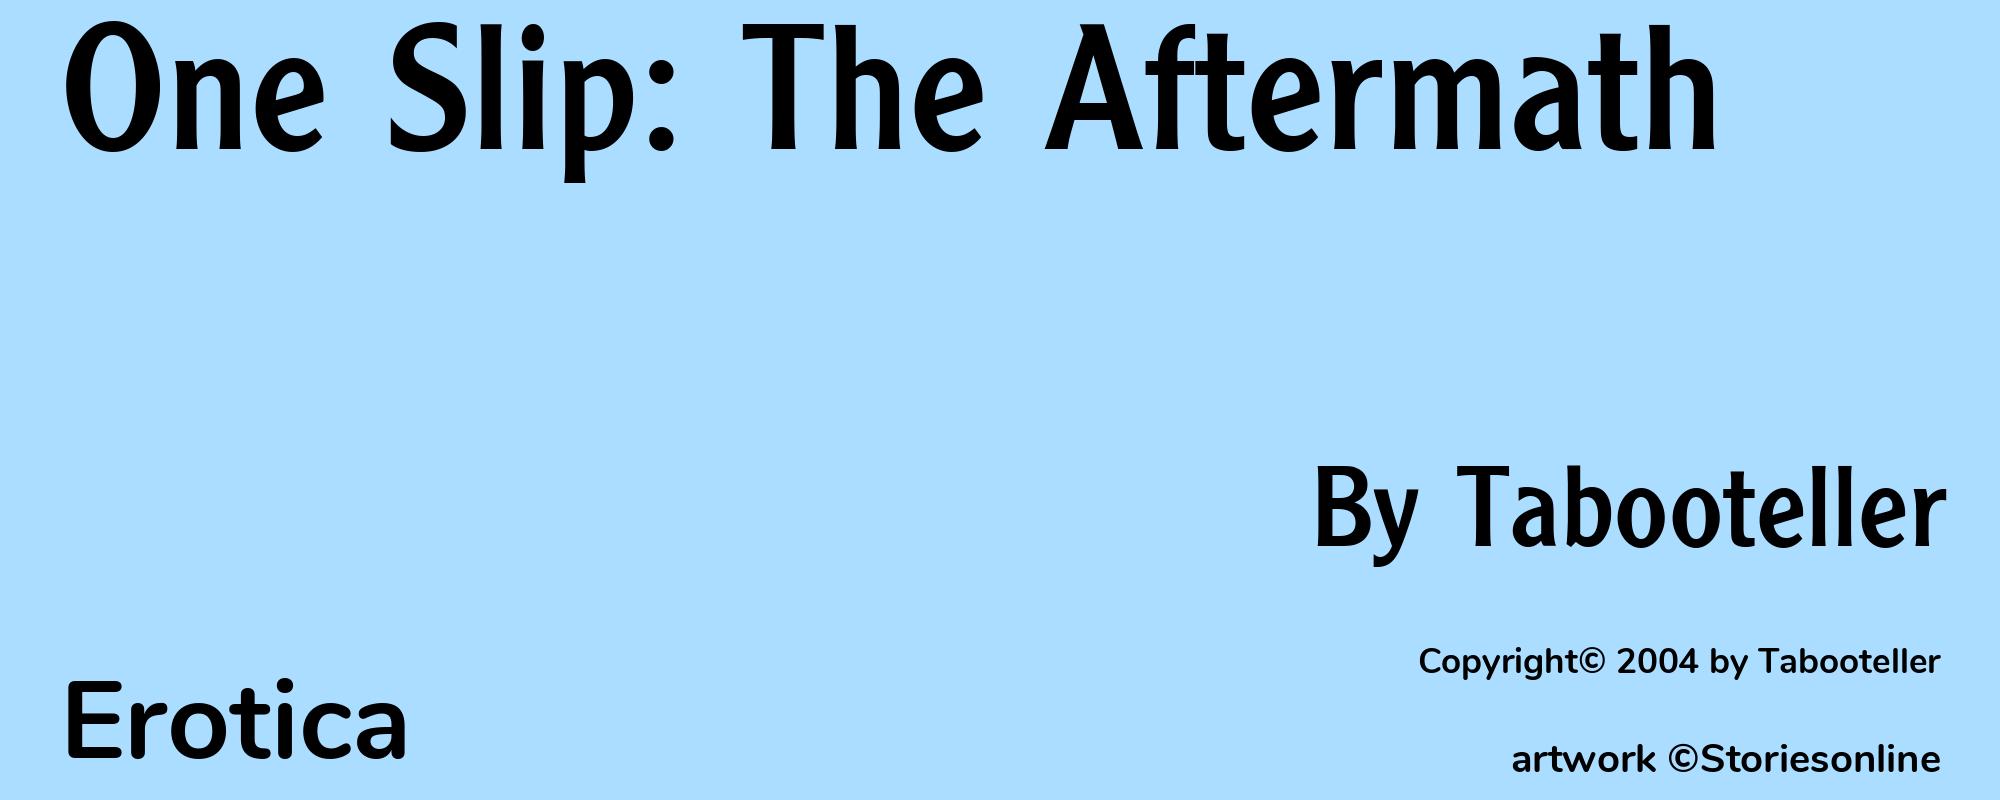 One Slip: The Aftermath - Cover